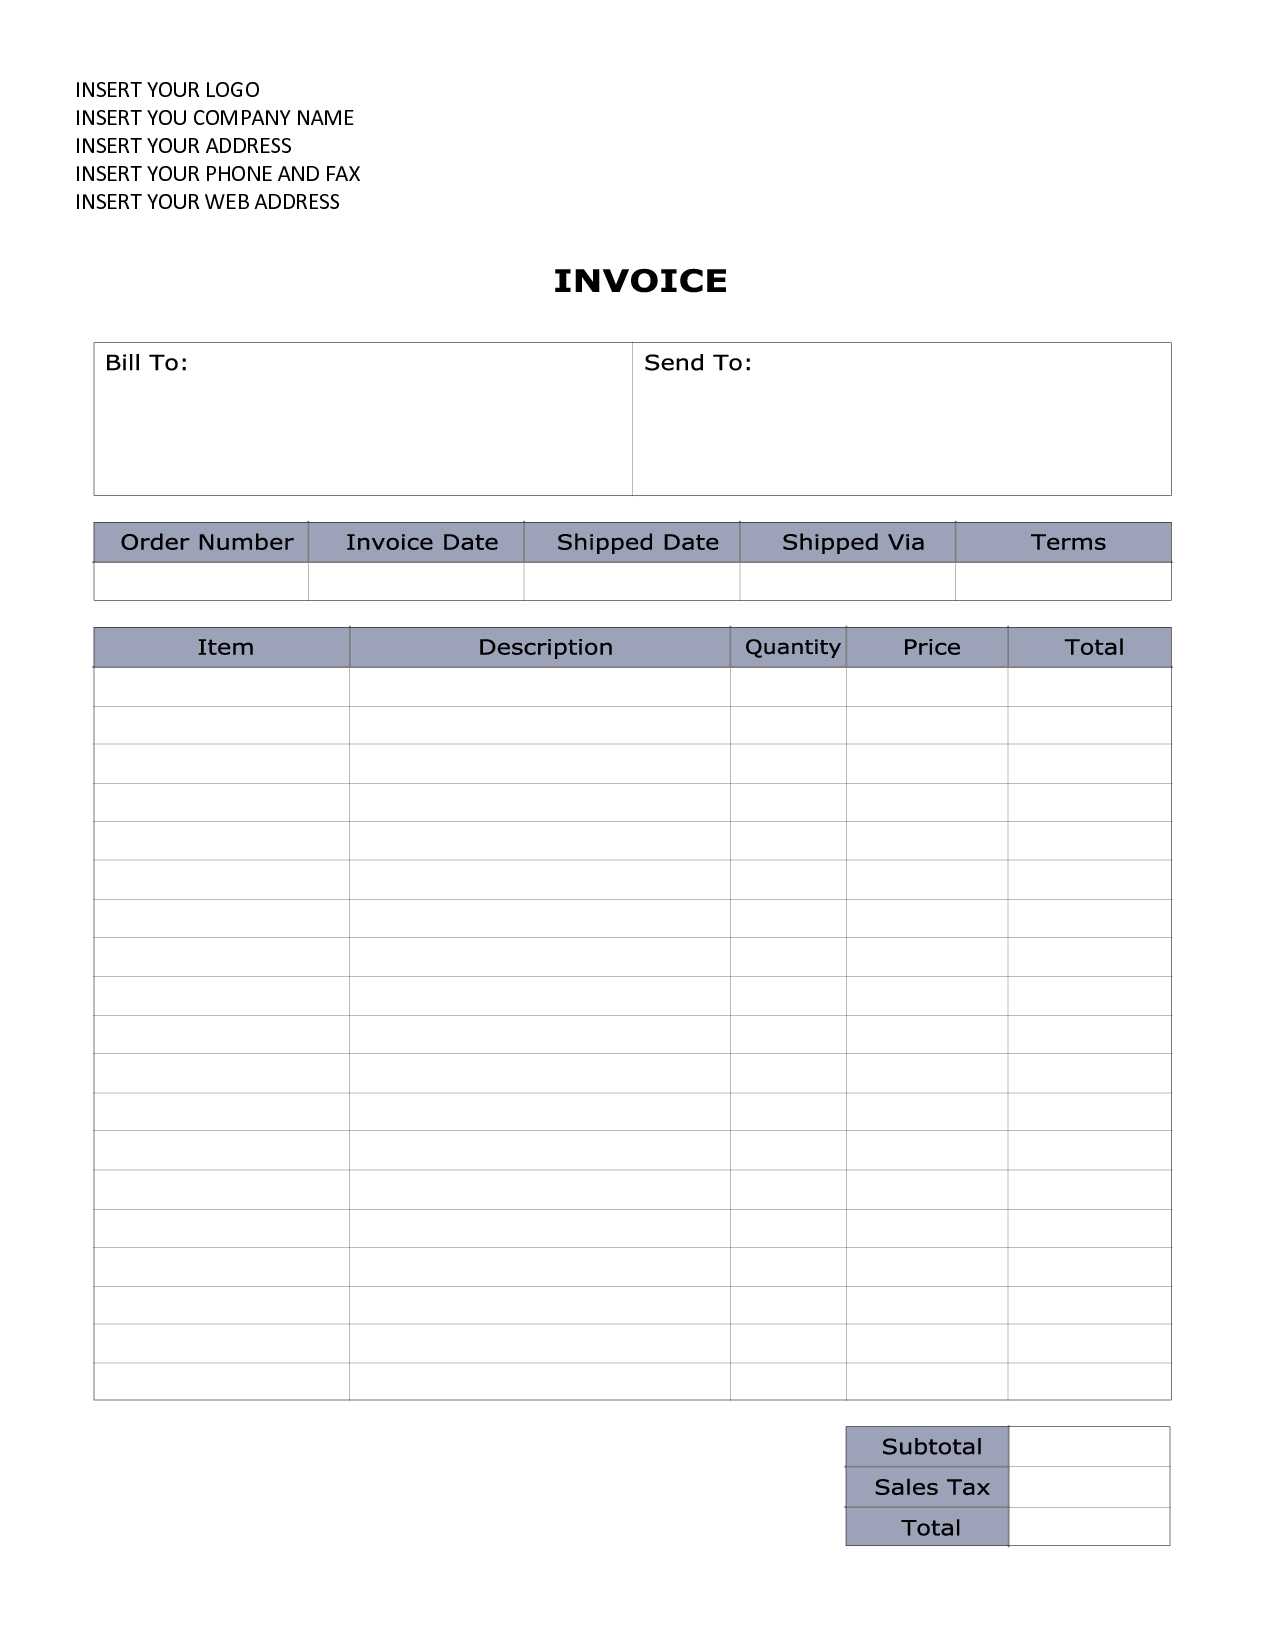 Printable Invoice Template Ms Word | Invoice Example With Regard To Invoice Template Word 2010